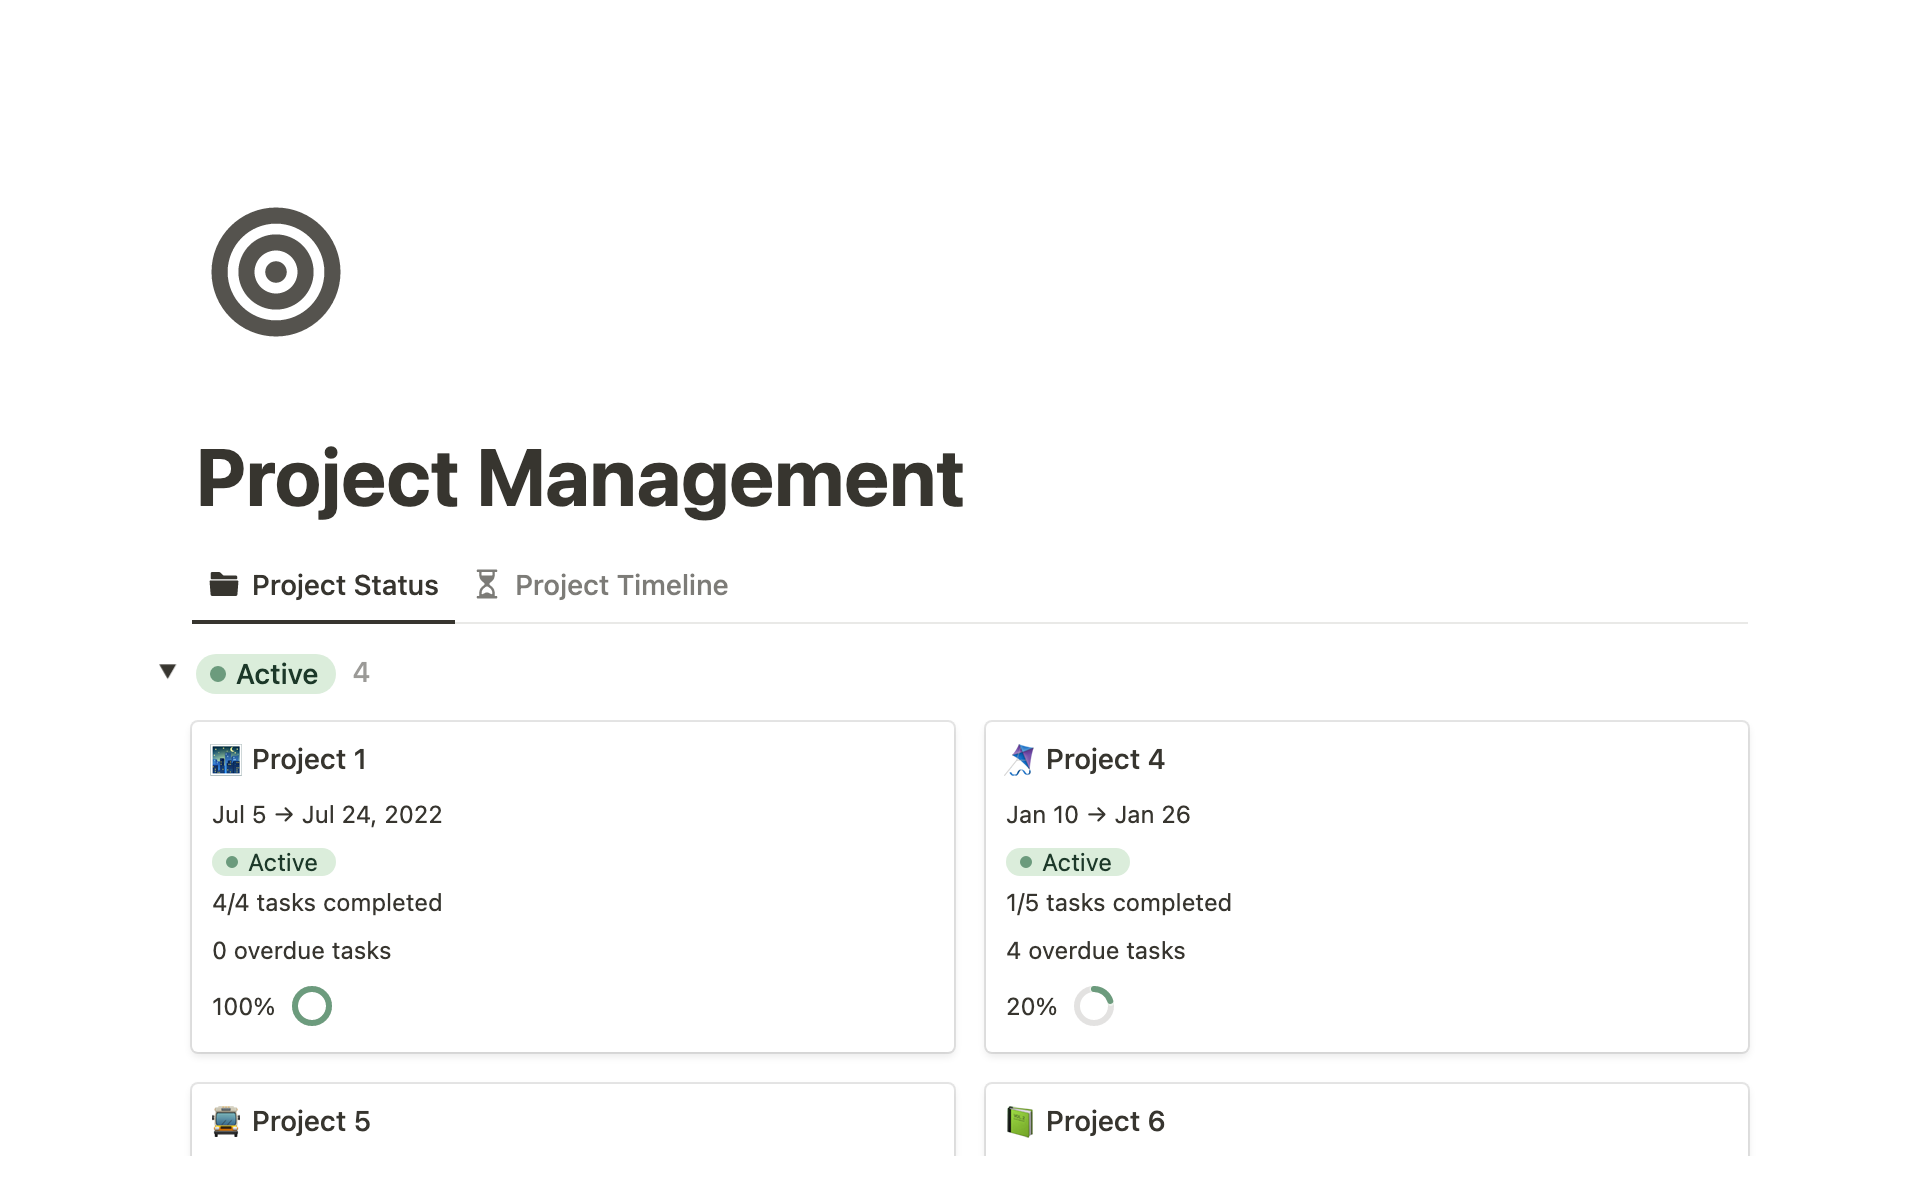 Project management template provide organizations with an efficient way to manage projects from start to finish.